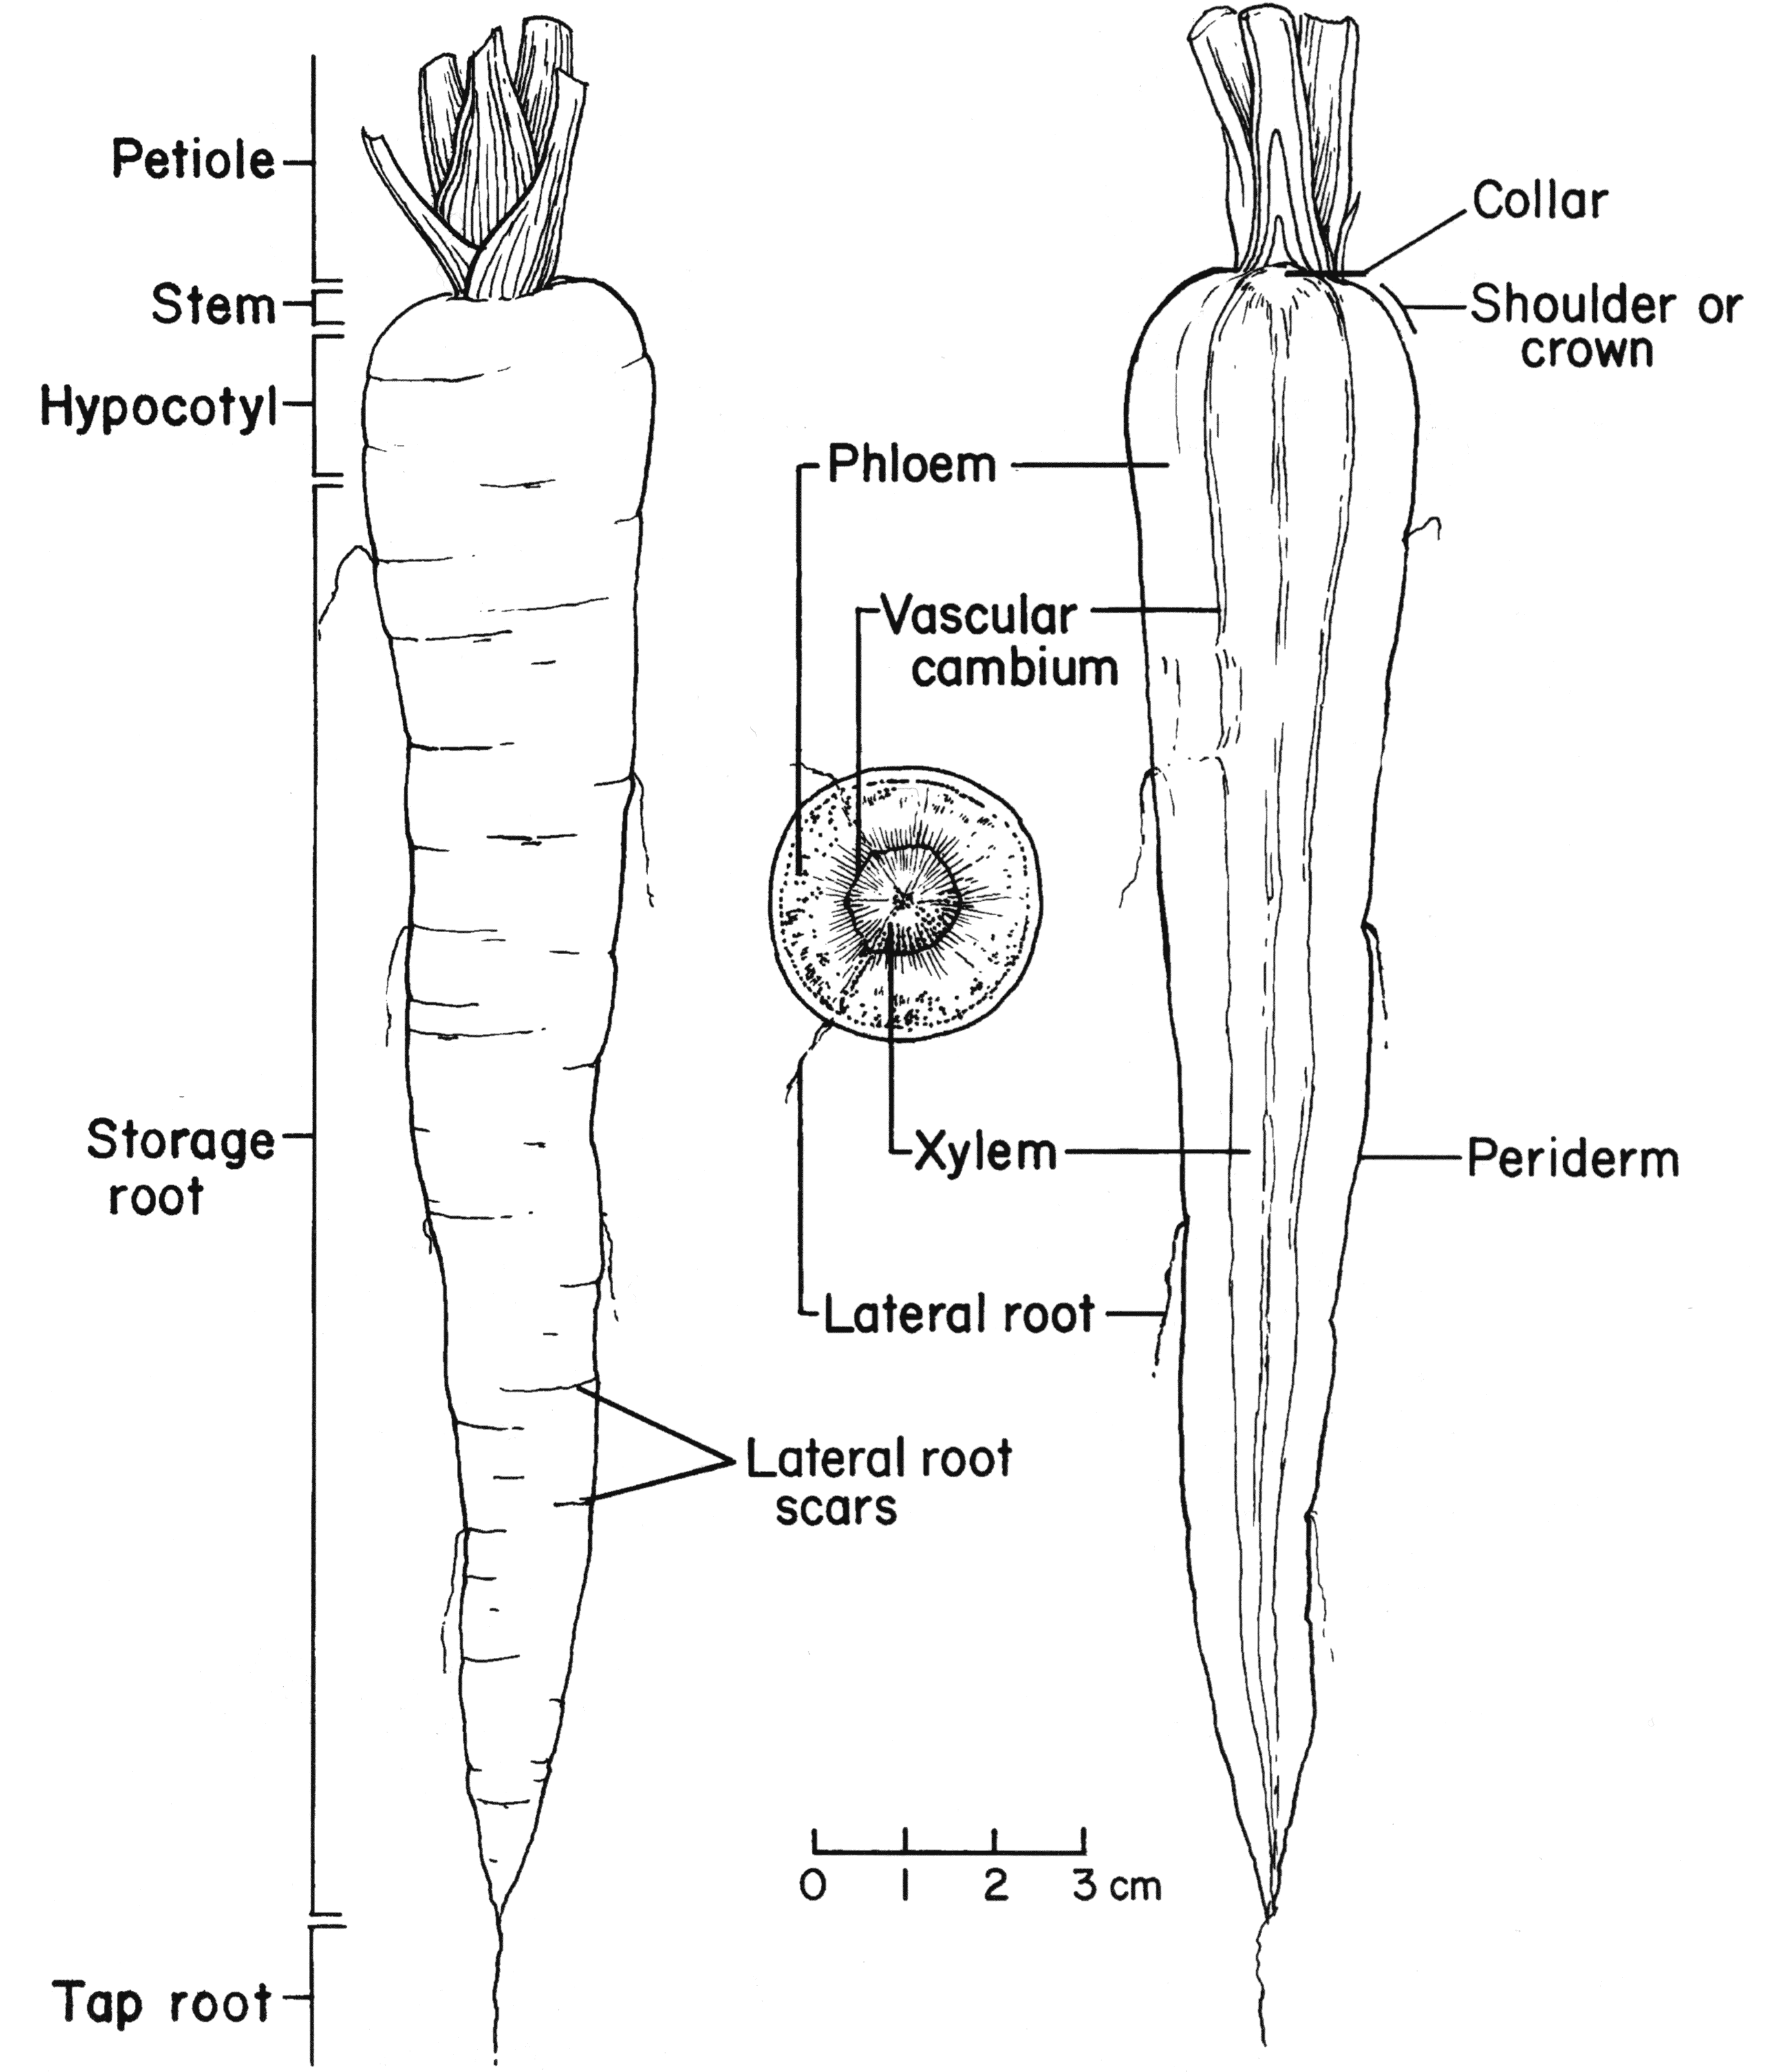 Carrot labeled diagram